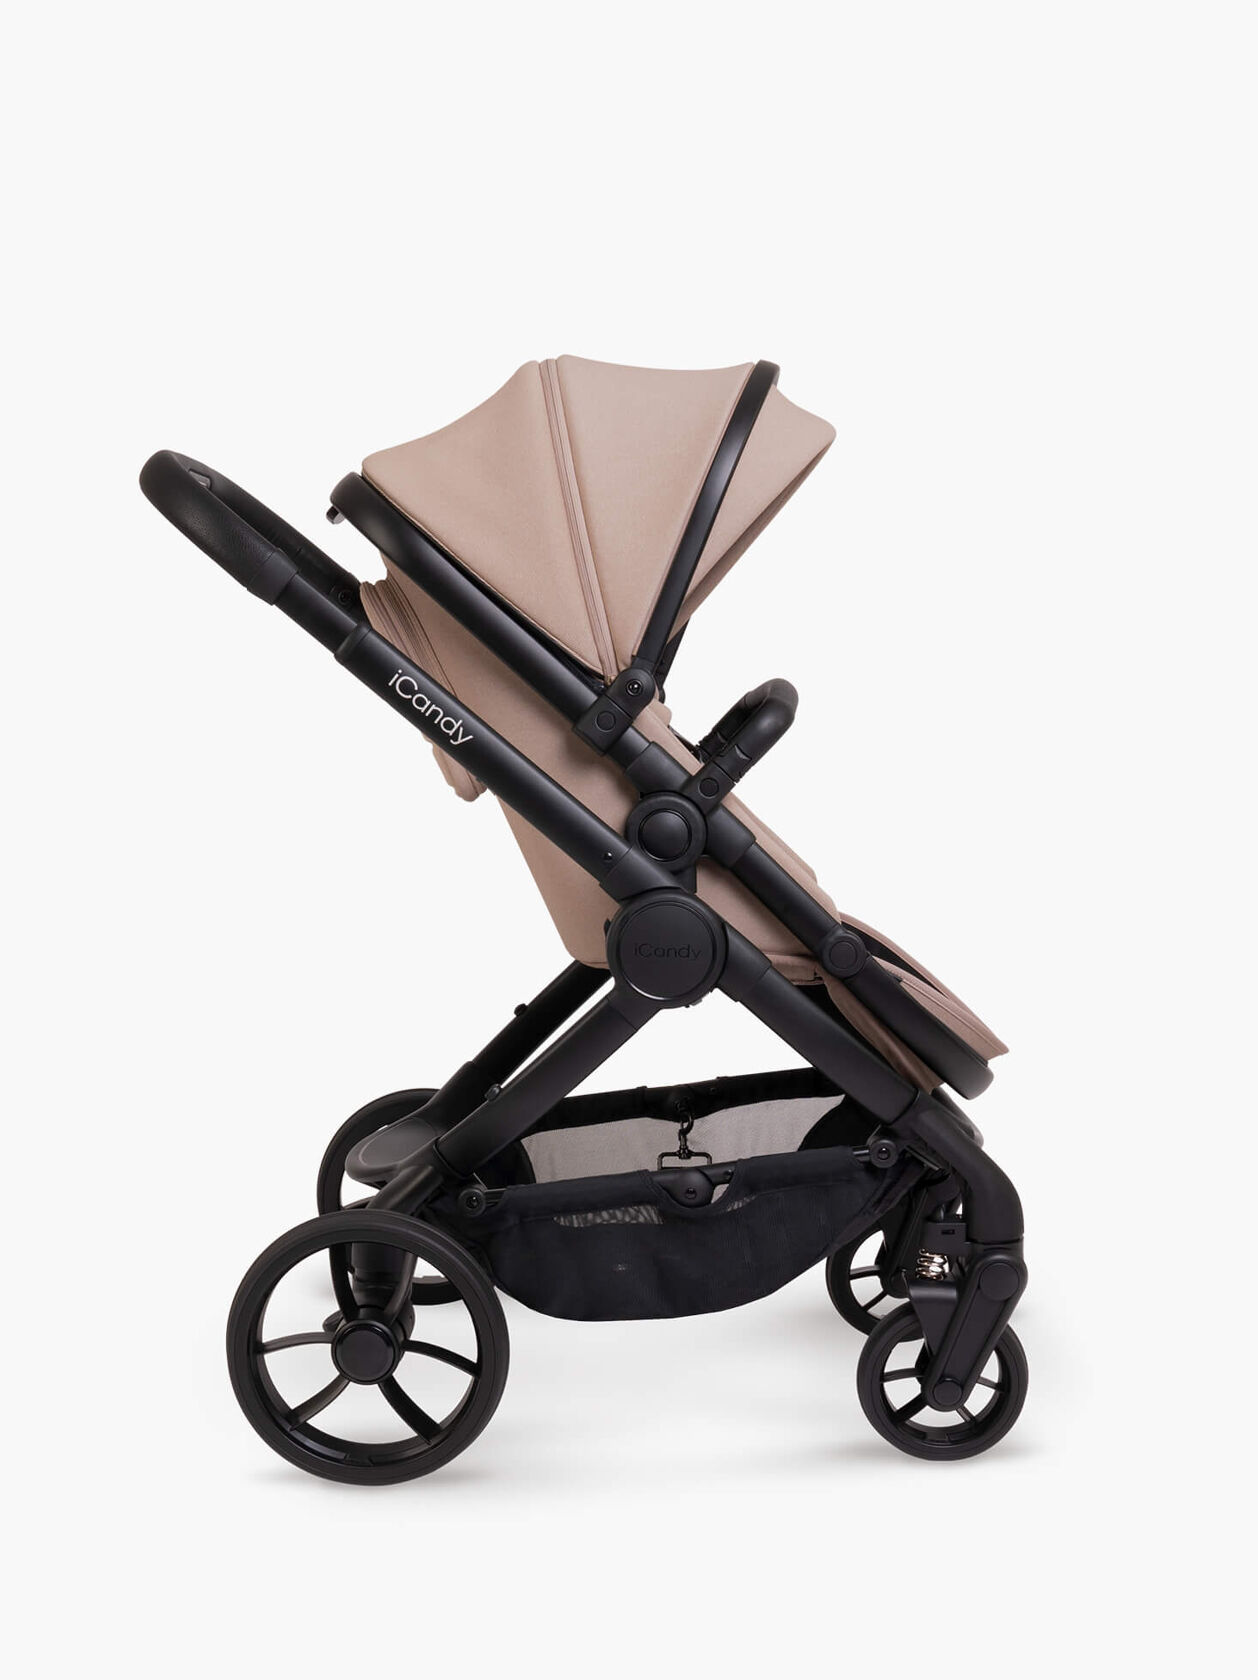 Peach 7 Pushchair and Carrycot - Complete Bundle